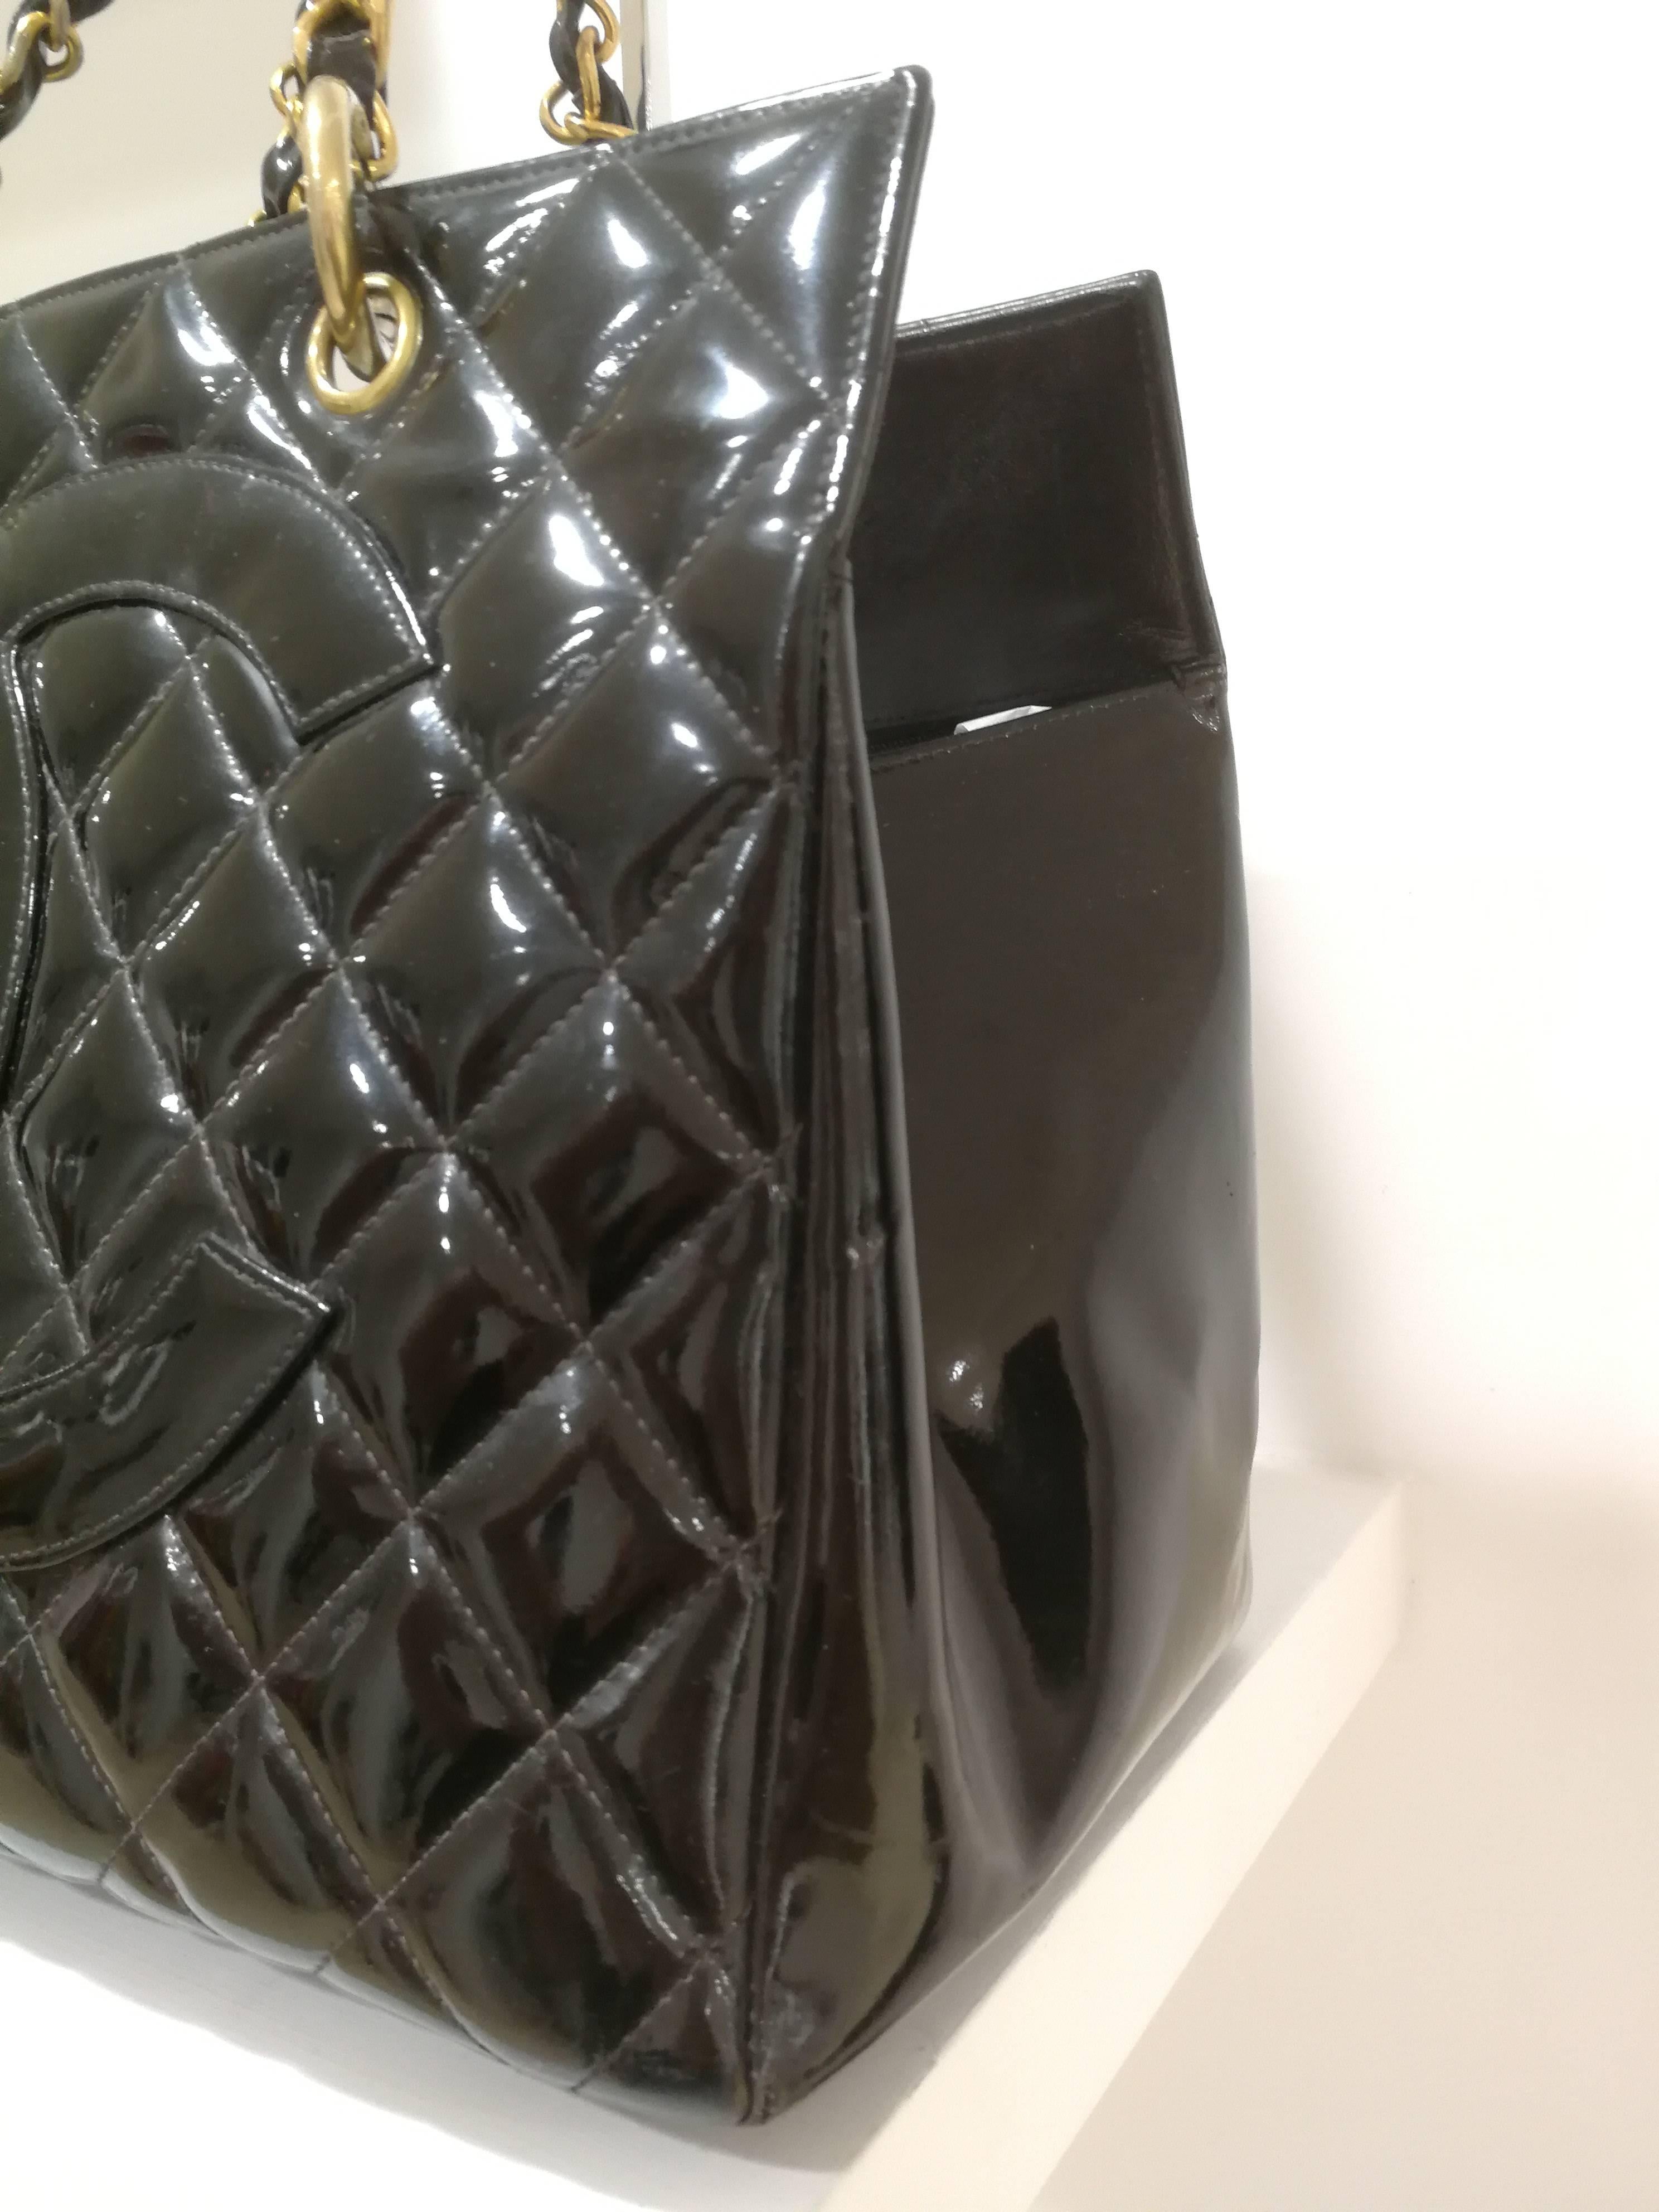 Women's Chanel black patent leather gold hardware bag